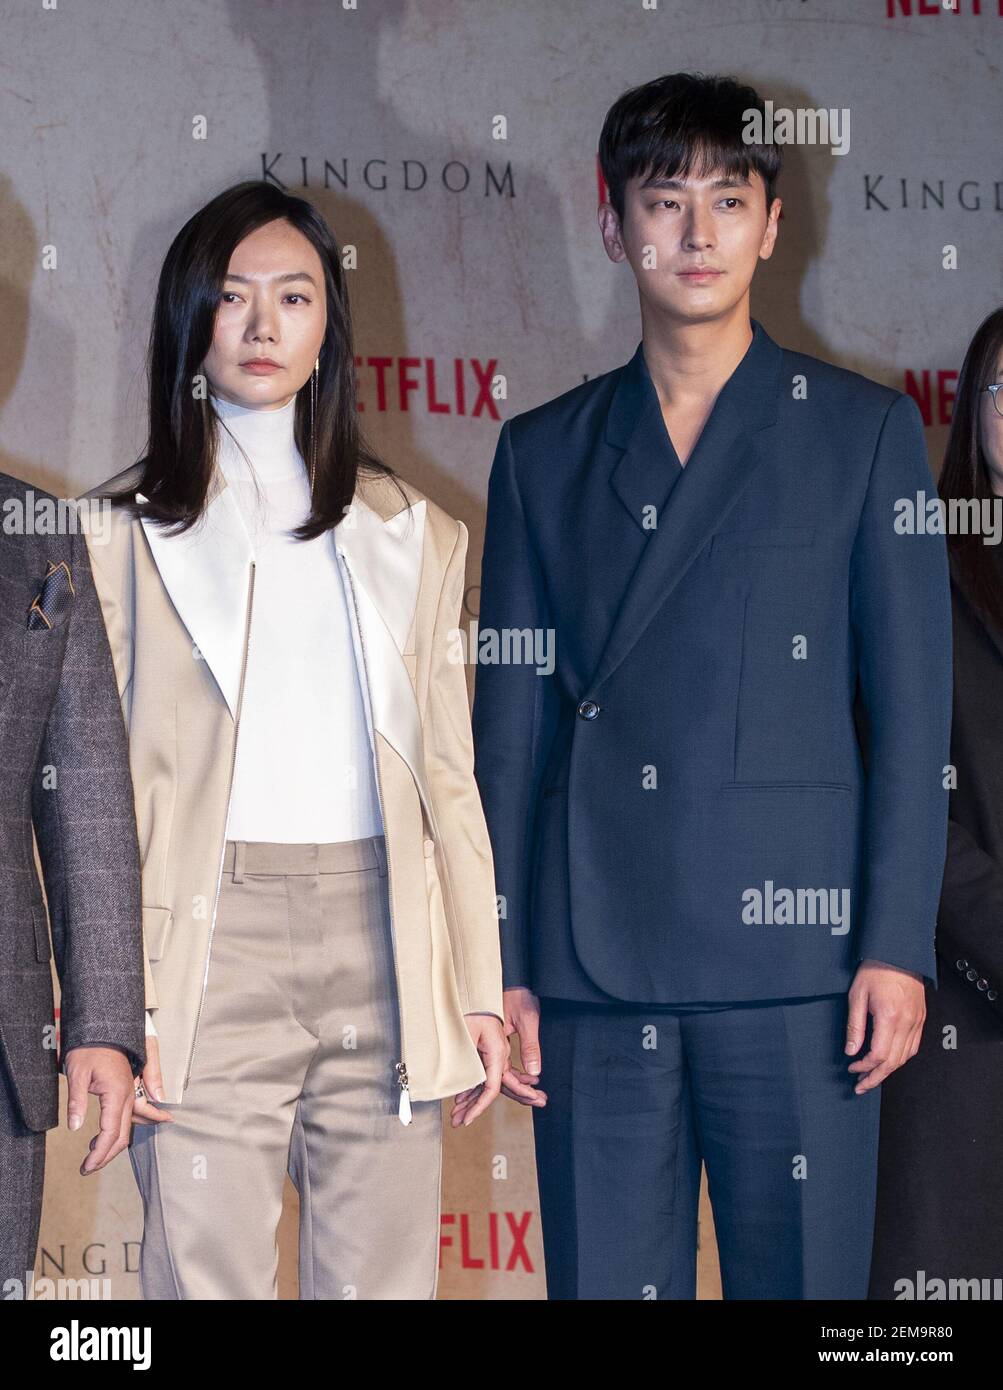 L to R) South Korean actors Bae Doo-na and Ju Ji-hoon, attend a photo call  for the Netflix film 'Kingdom' press conference with South Korean director  Kim Seong-hoon at Intercontinental hotel in